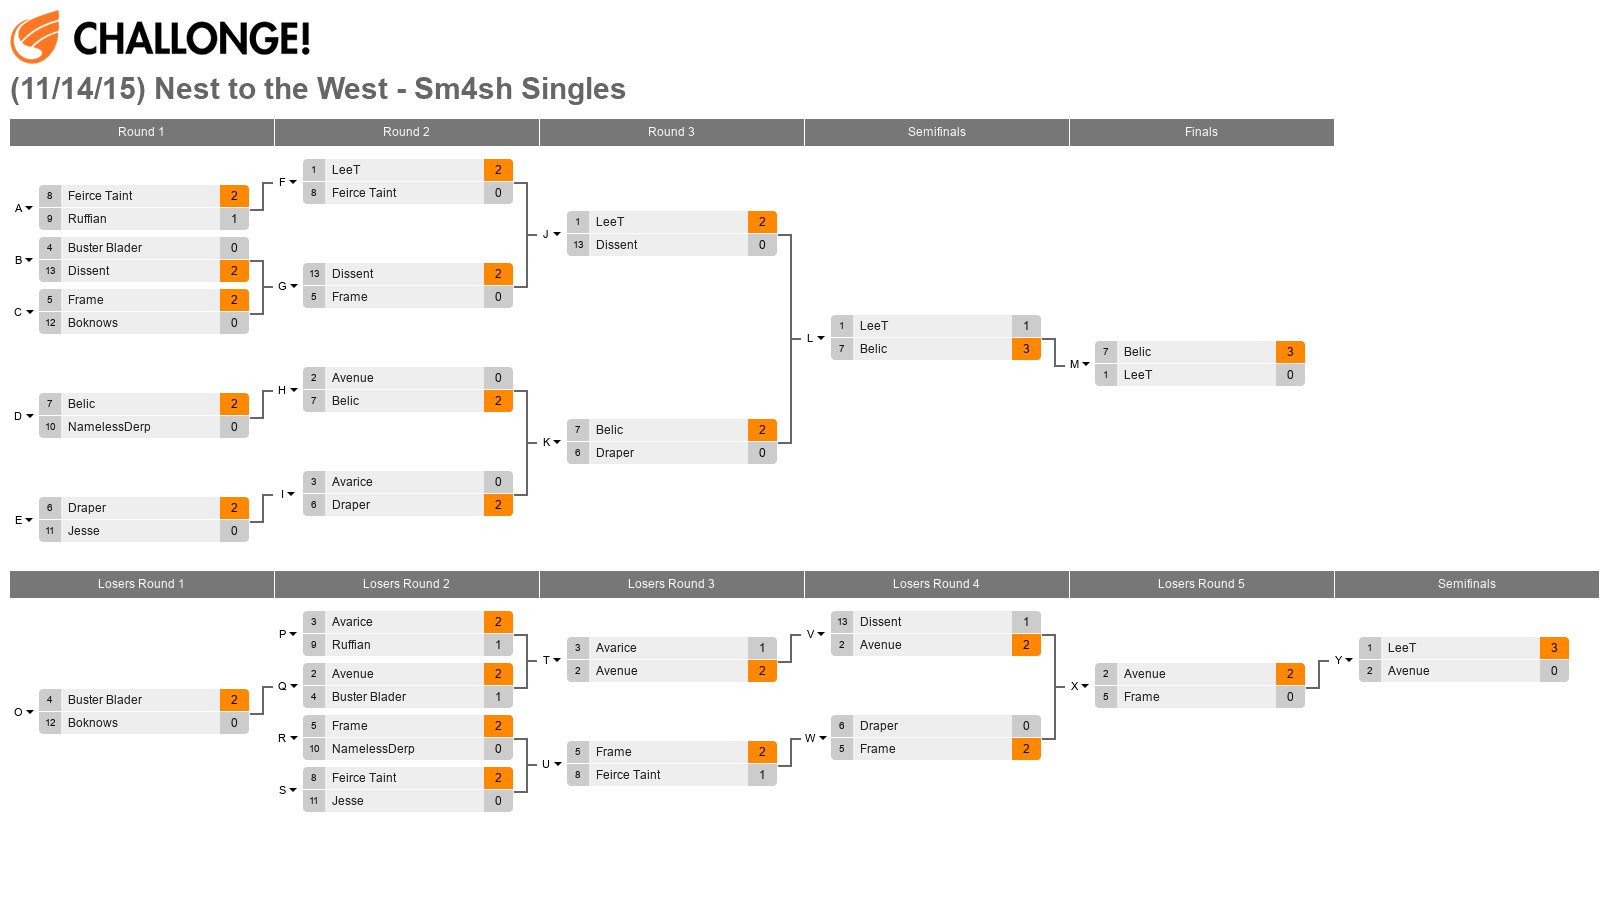 Nest to the West - Sm4sh Singles